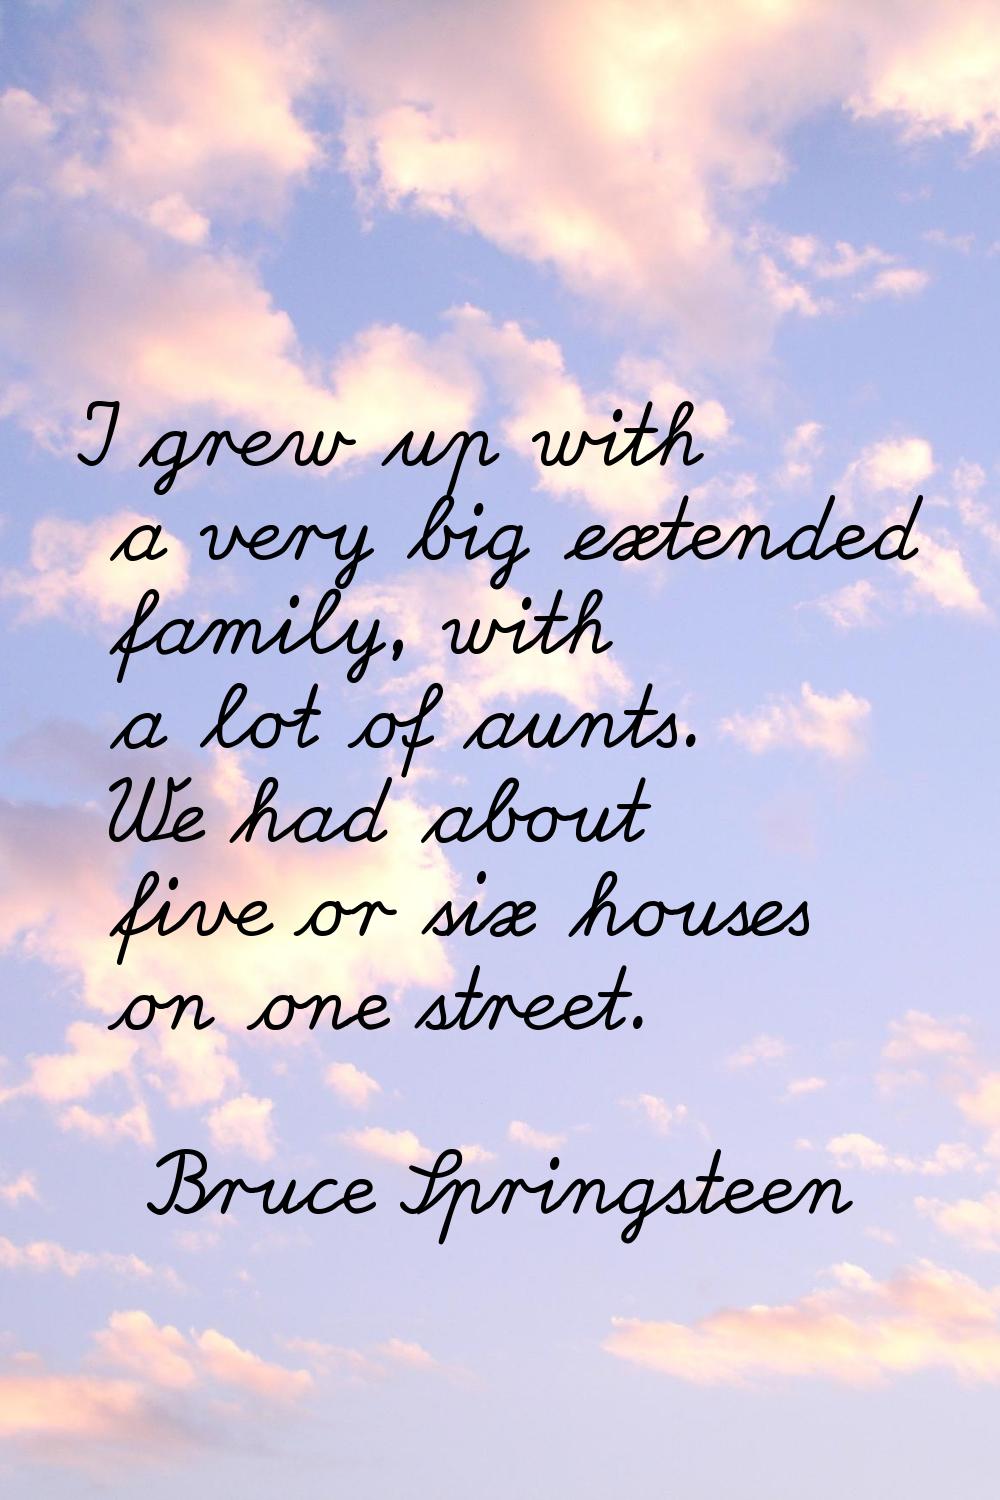 I grew up with a very big extended family, with a lot of aunts. We had about five or six houses on 